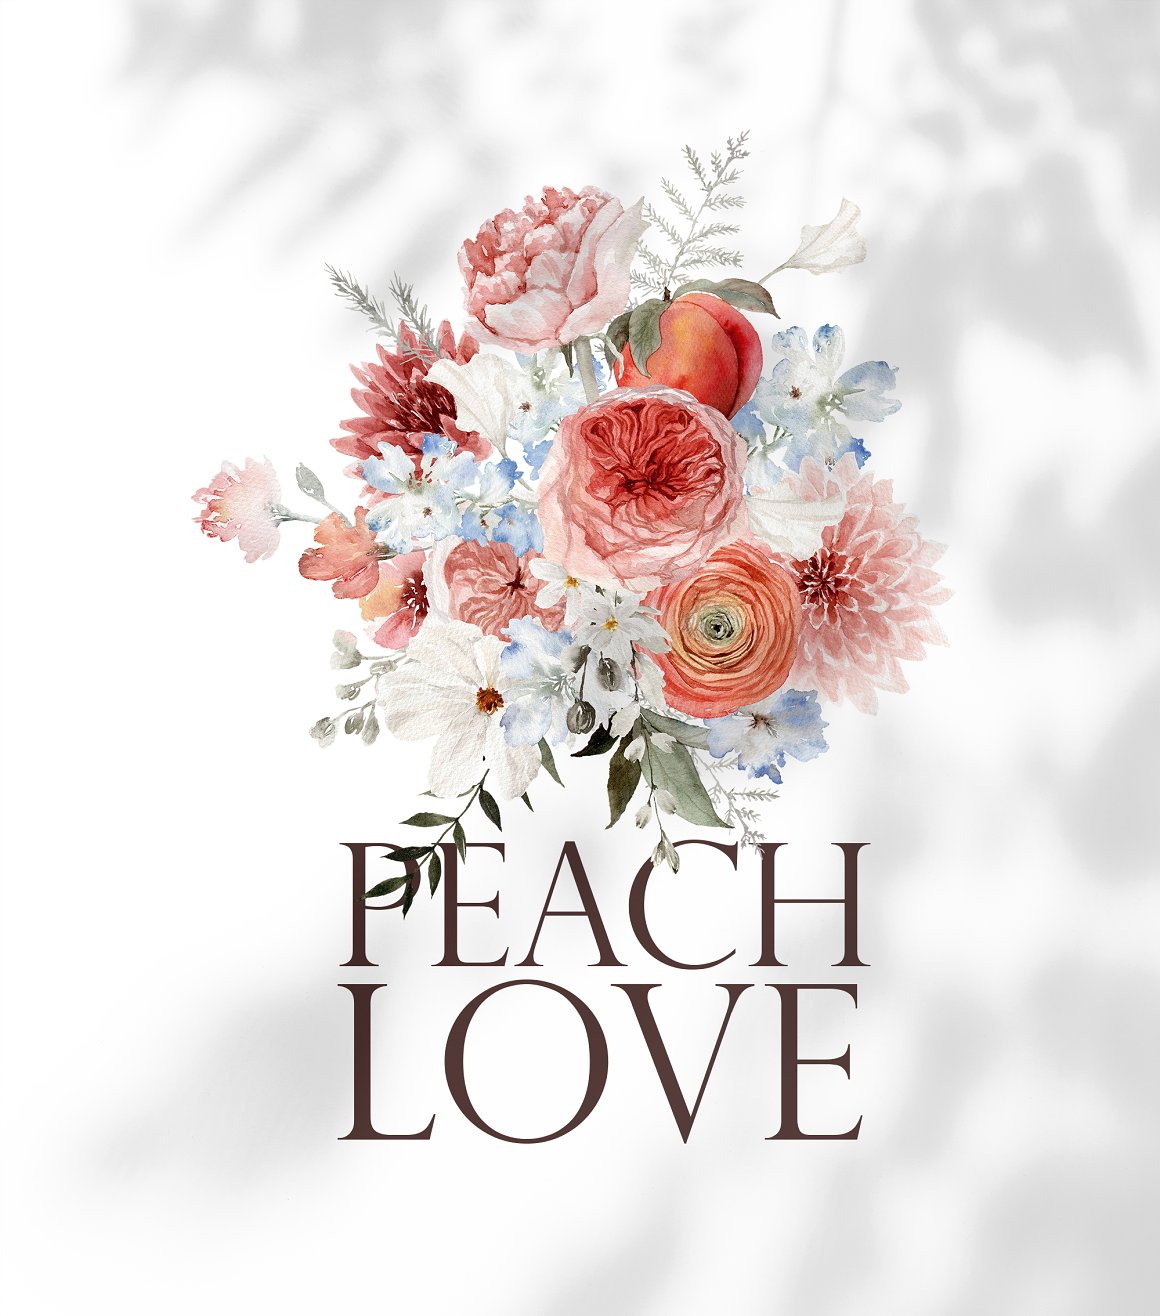 Flower and peach composition and black lettering "Peach Love" on a white background.